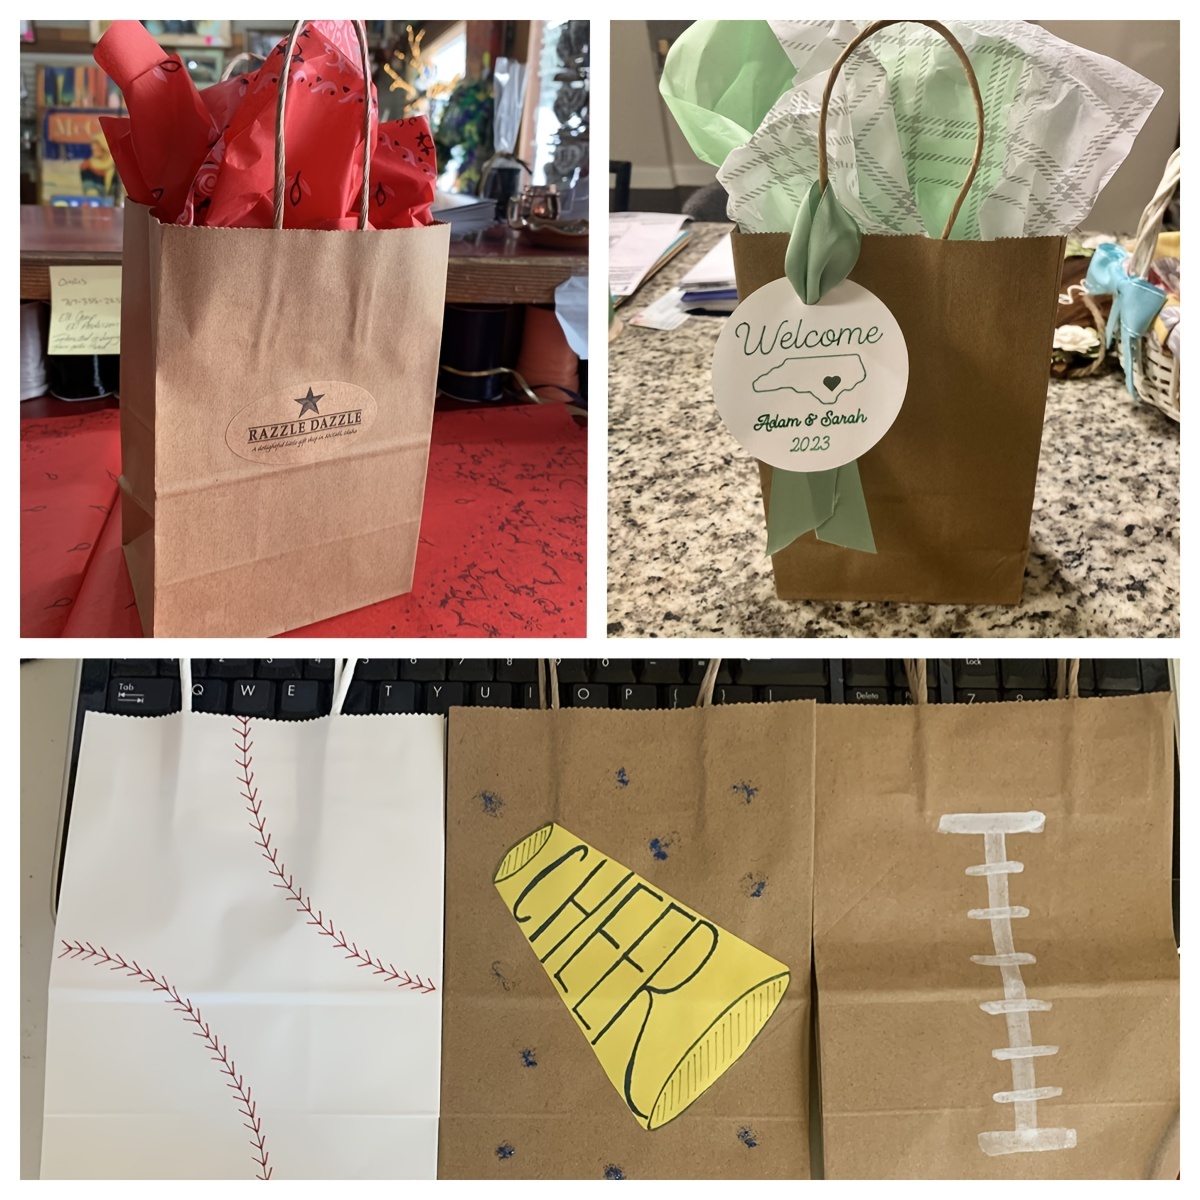 8 Ideas for Welcome Bags